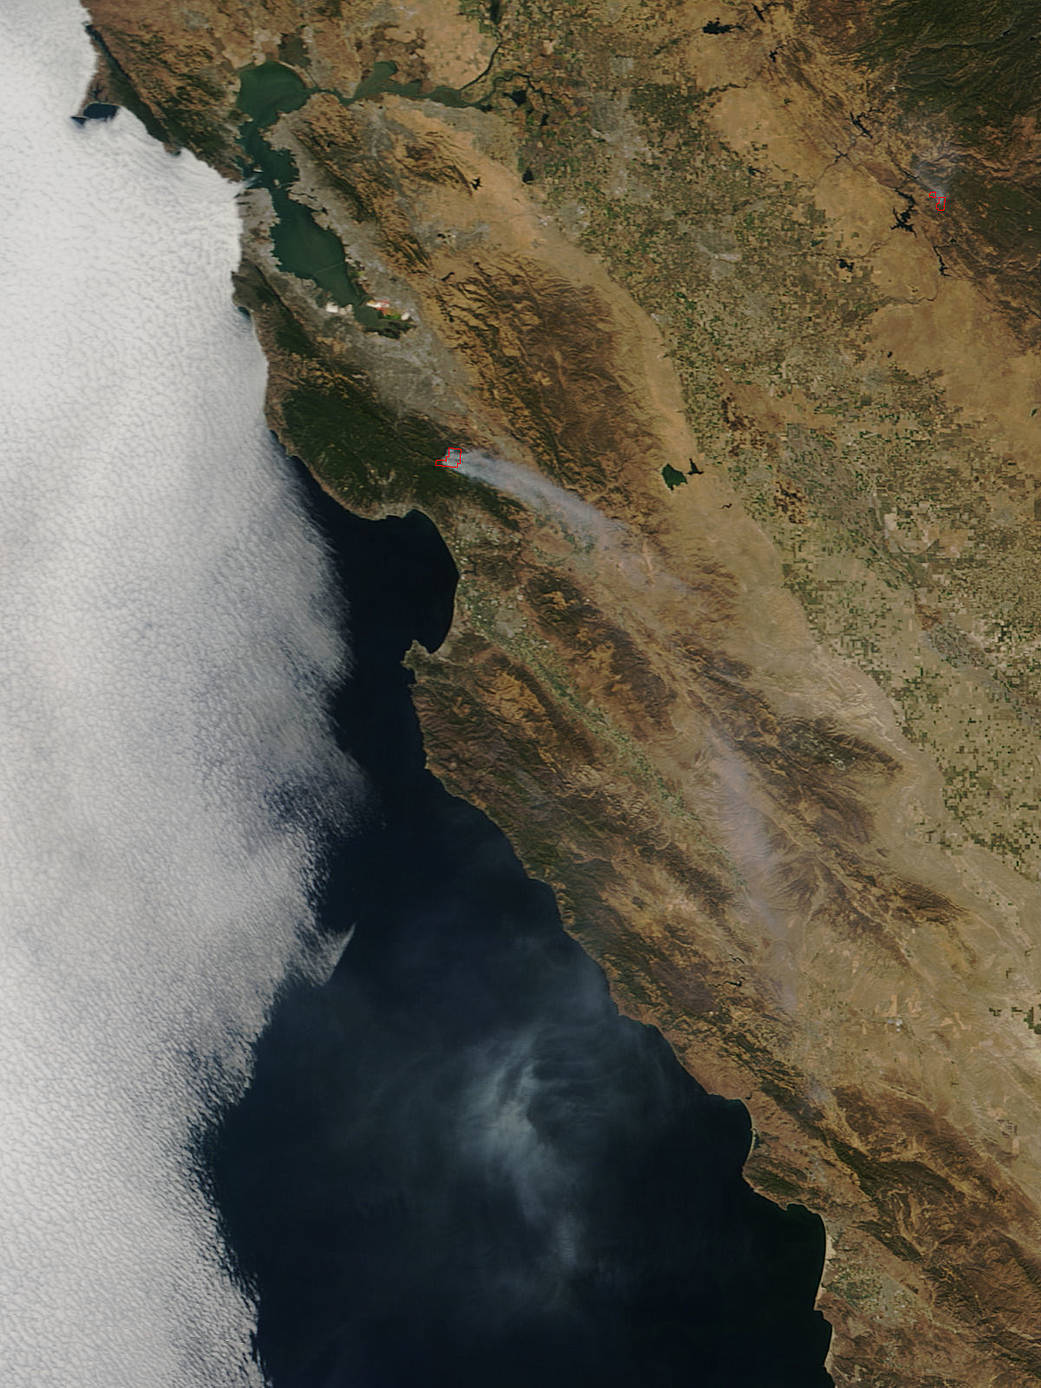 Terra image of the Loma Fire in California